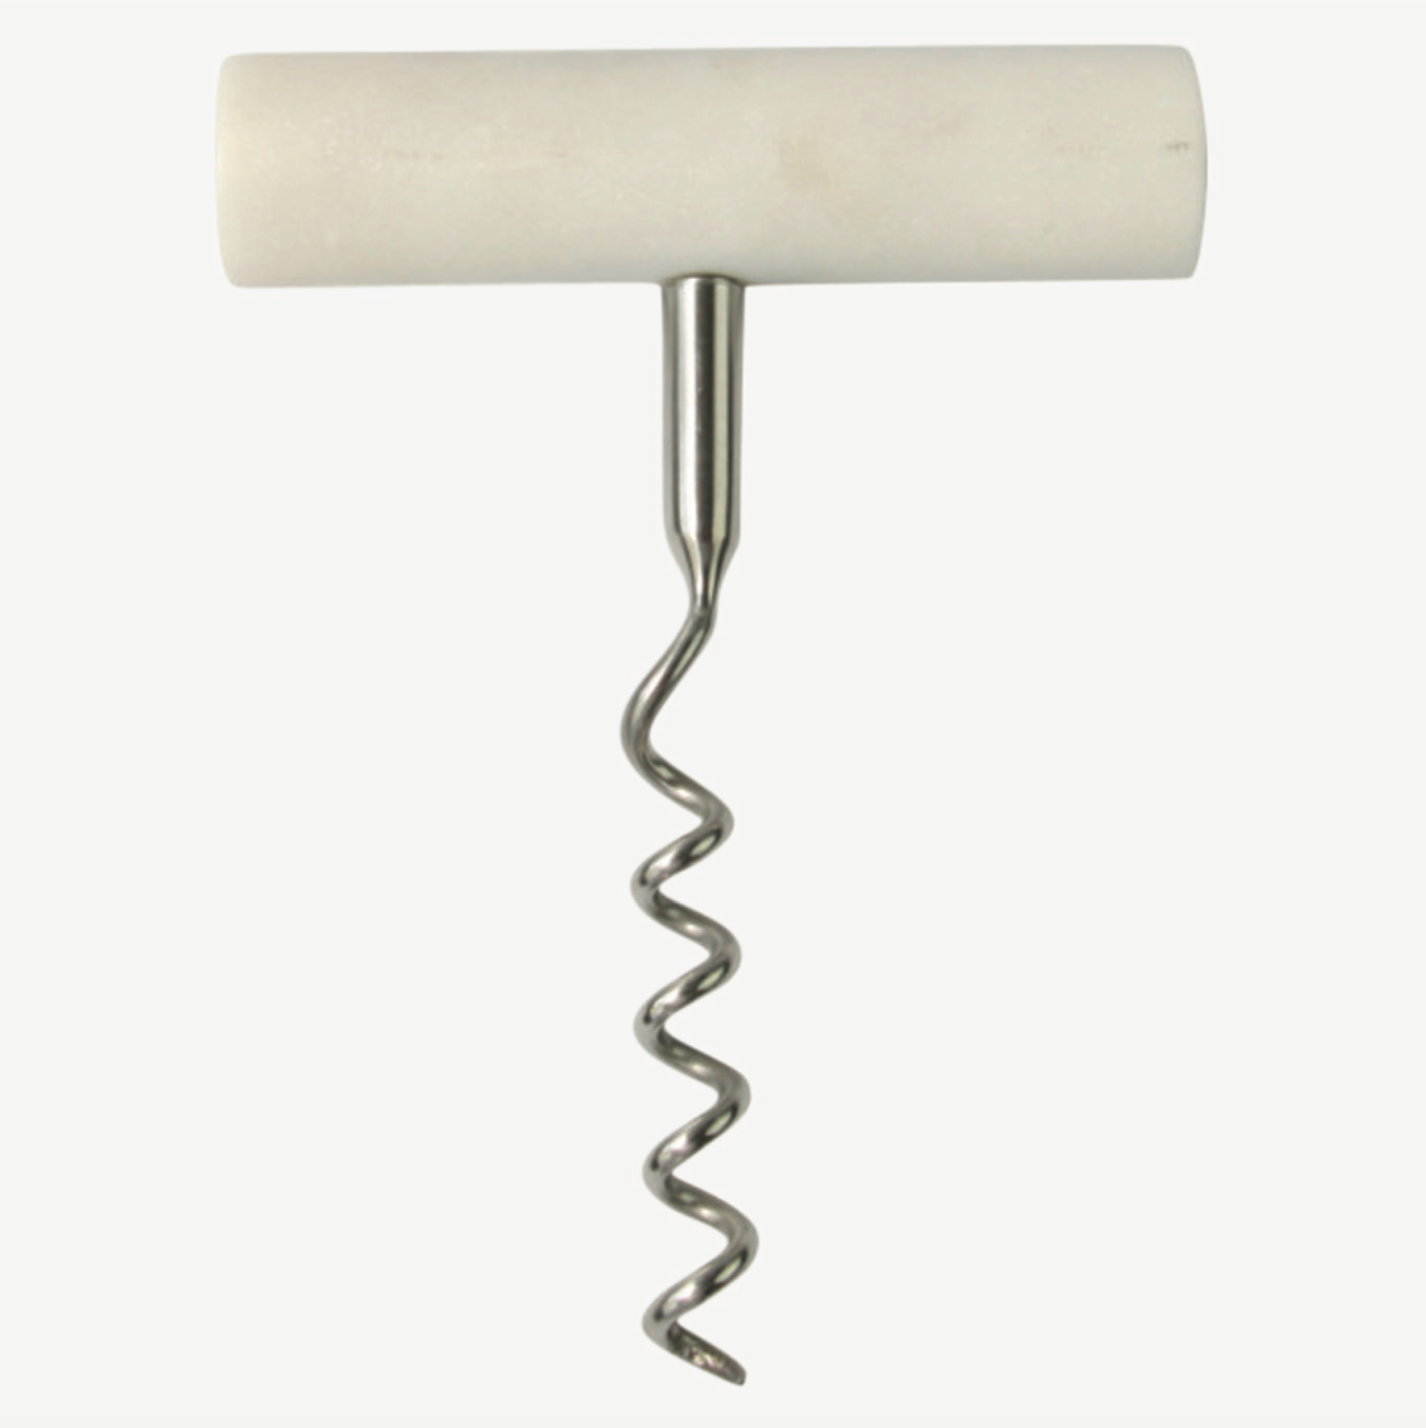 Marble and Stainless Corkscrew